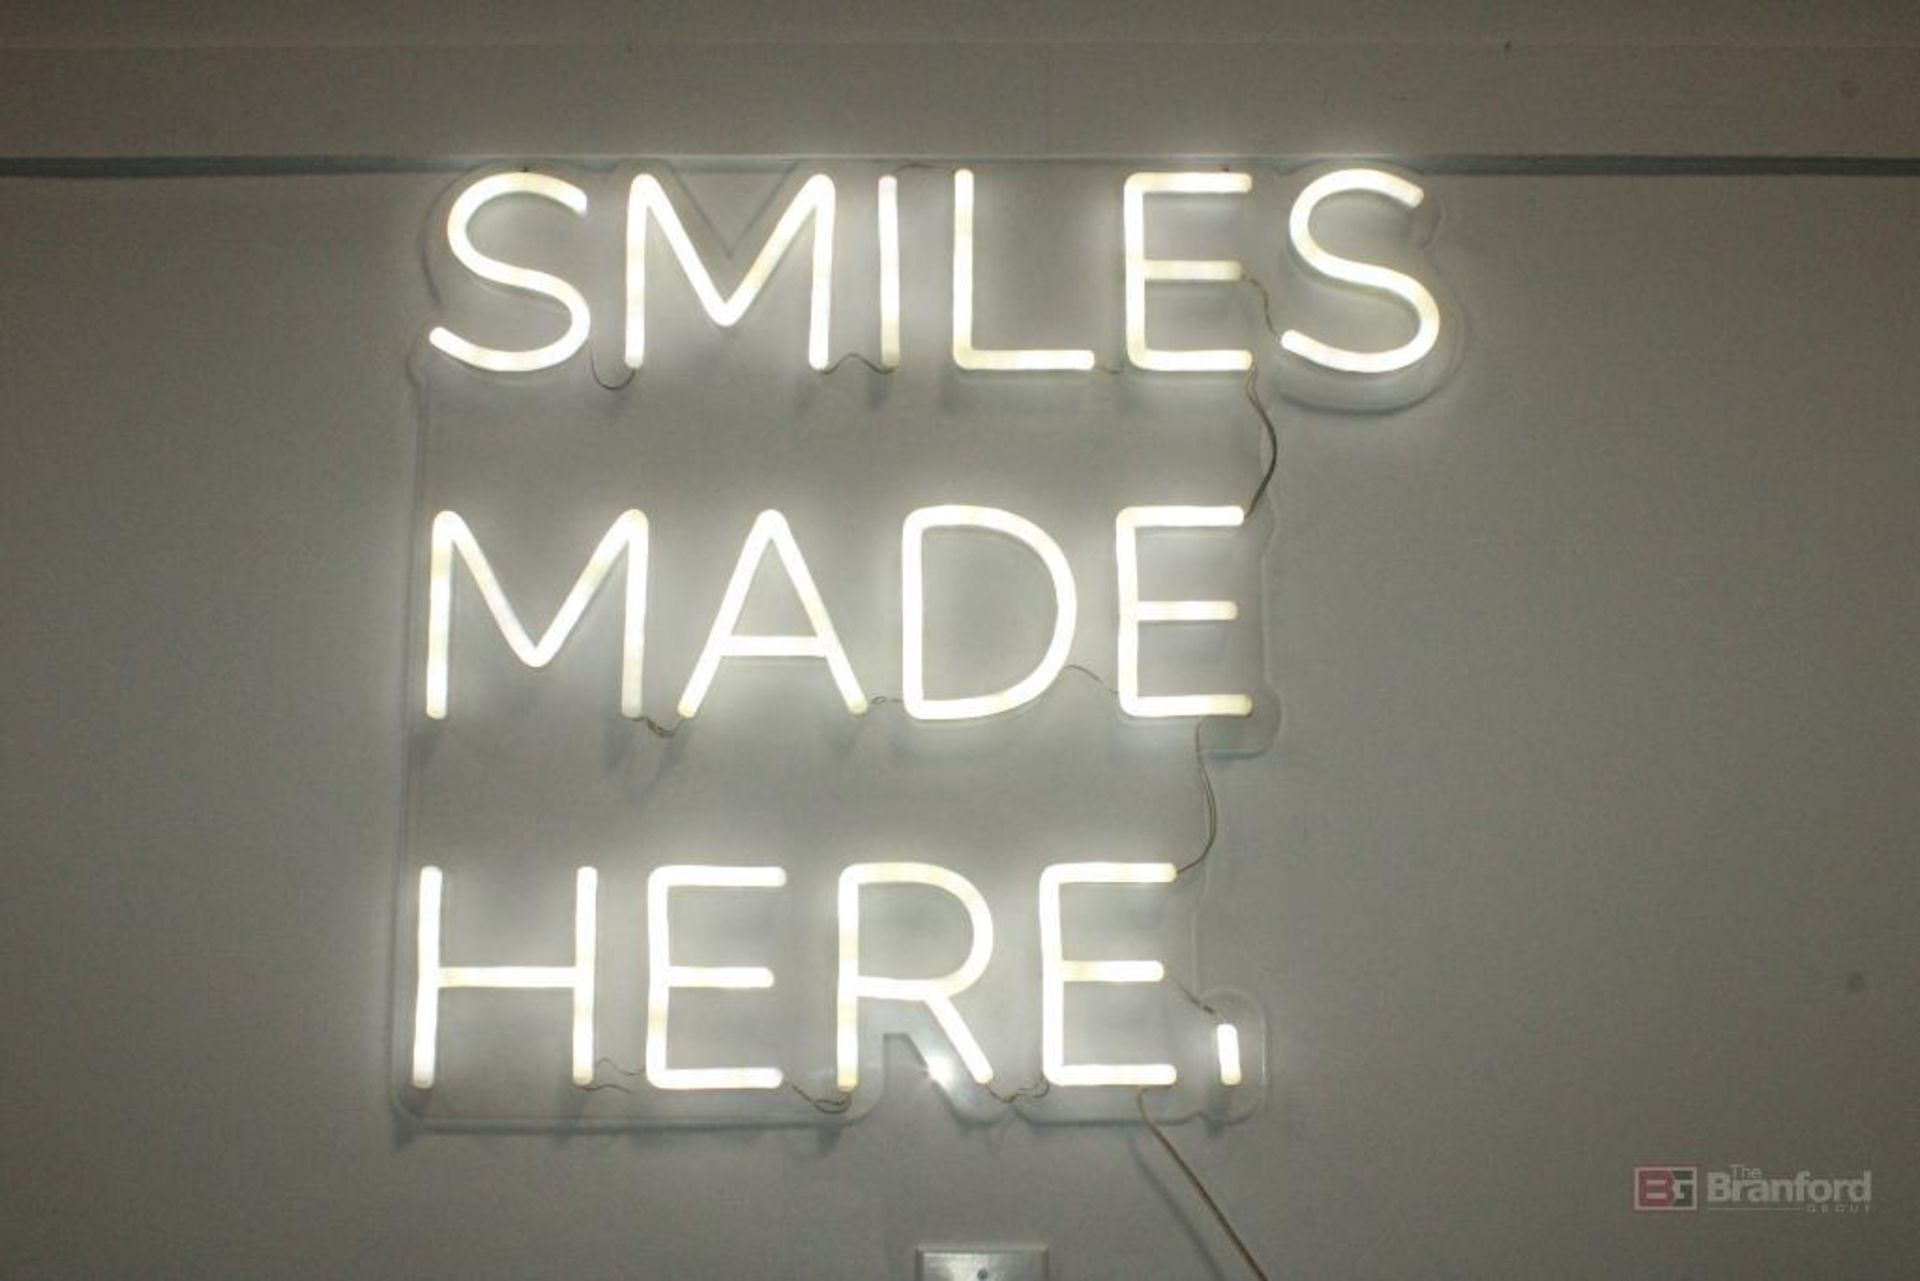 (2) Smiles Made Here. Sign, 27 x 29 inches